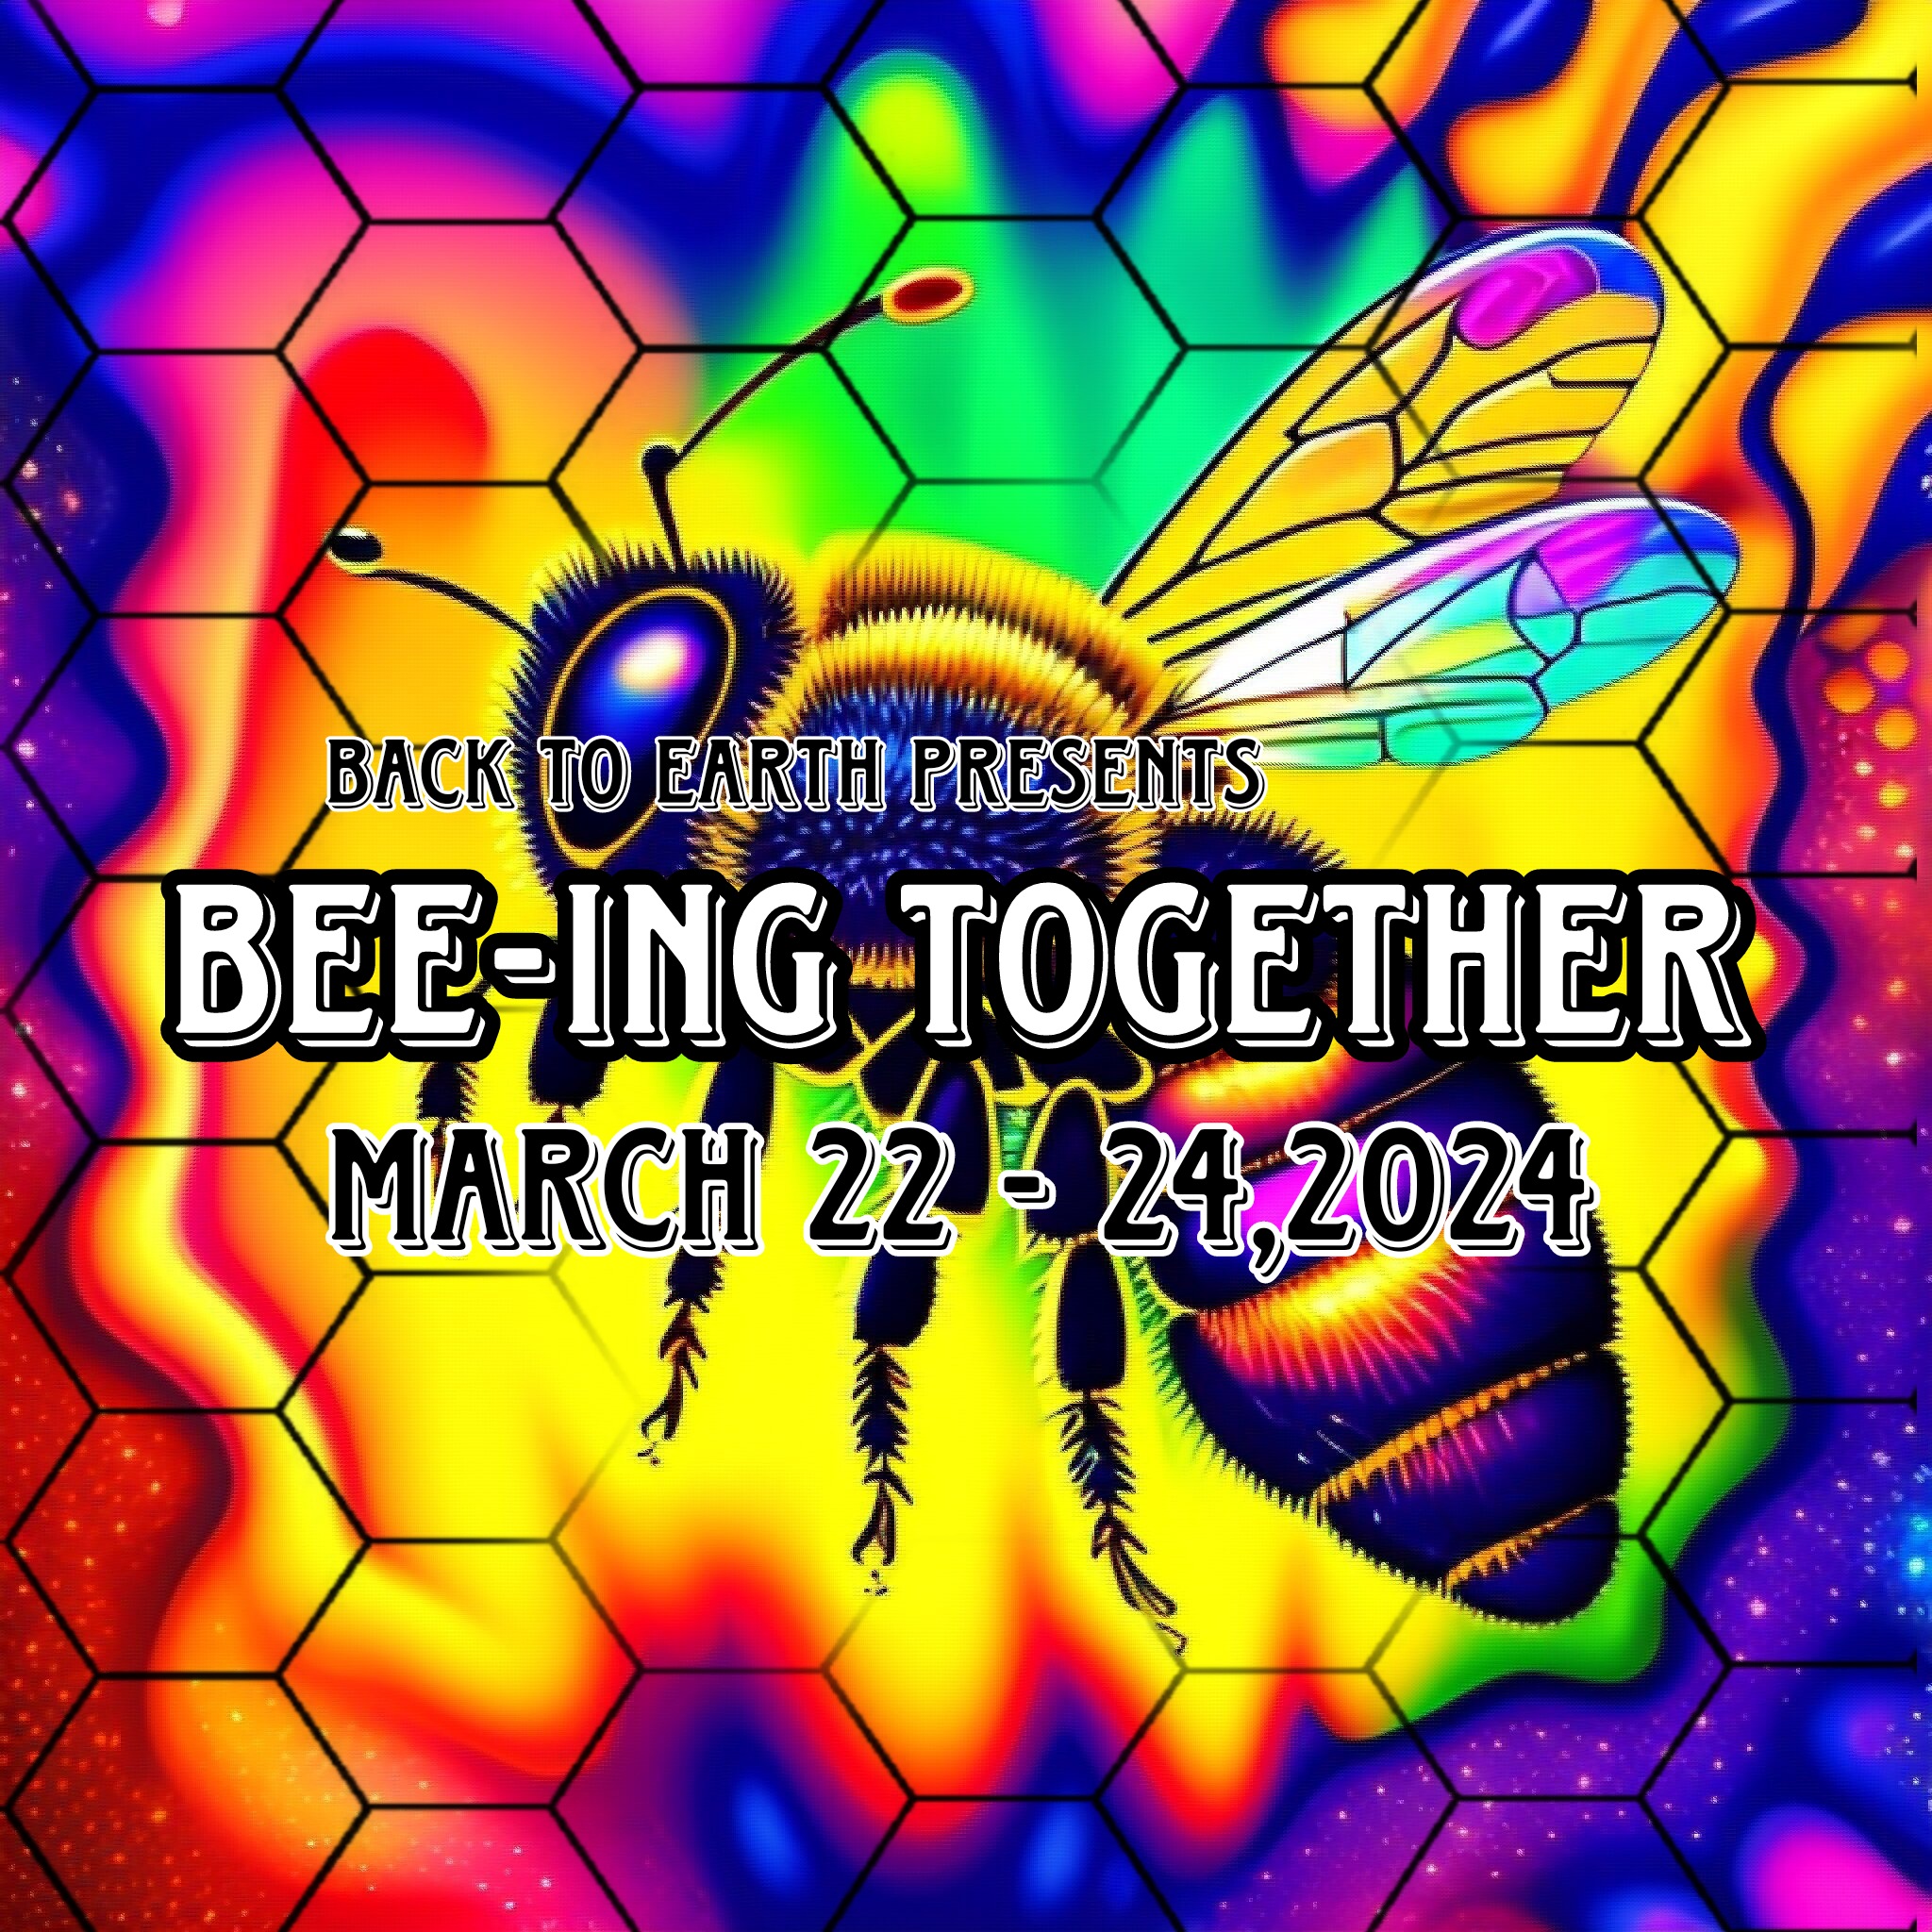 bee-ing together